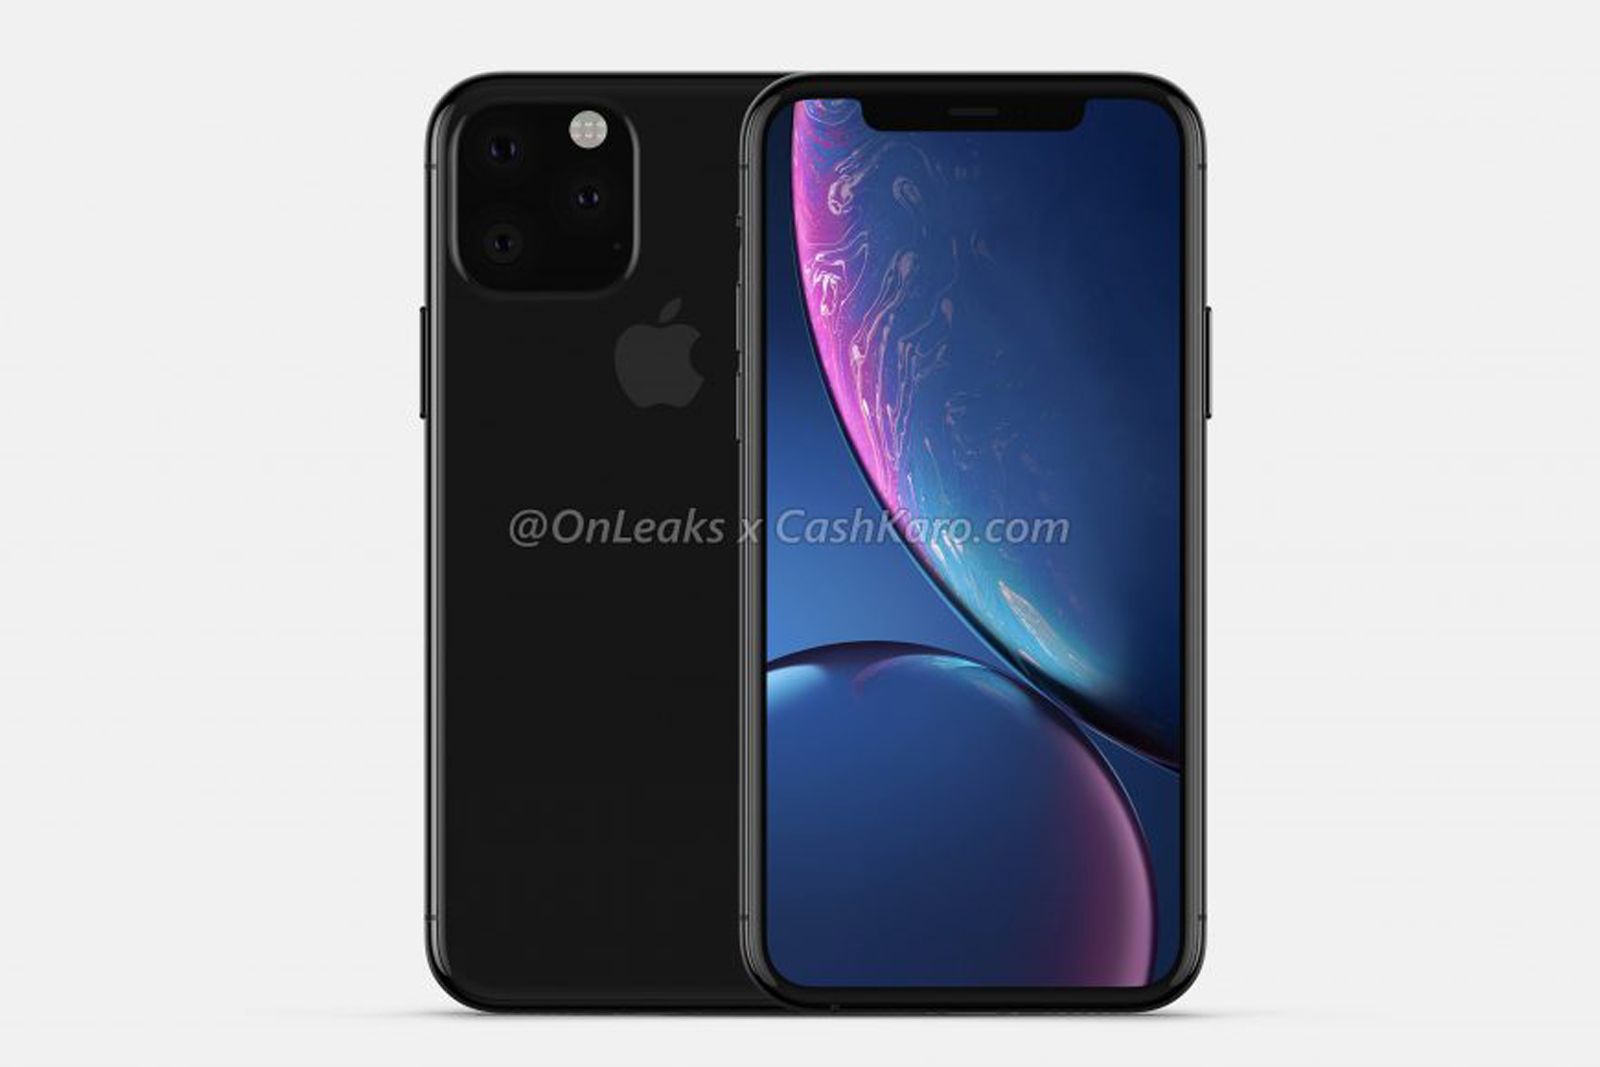 Apple iPhone XI render video shows device from all angles image 1